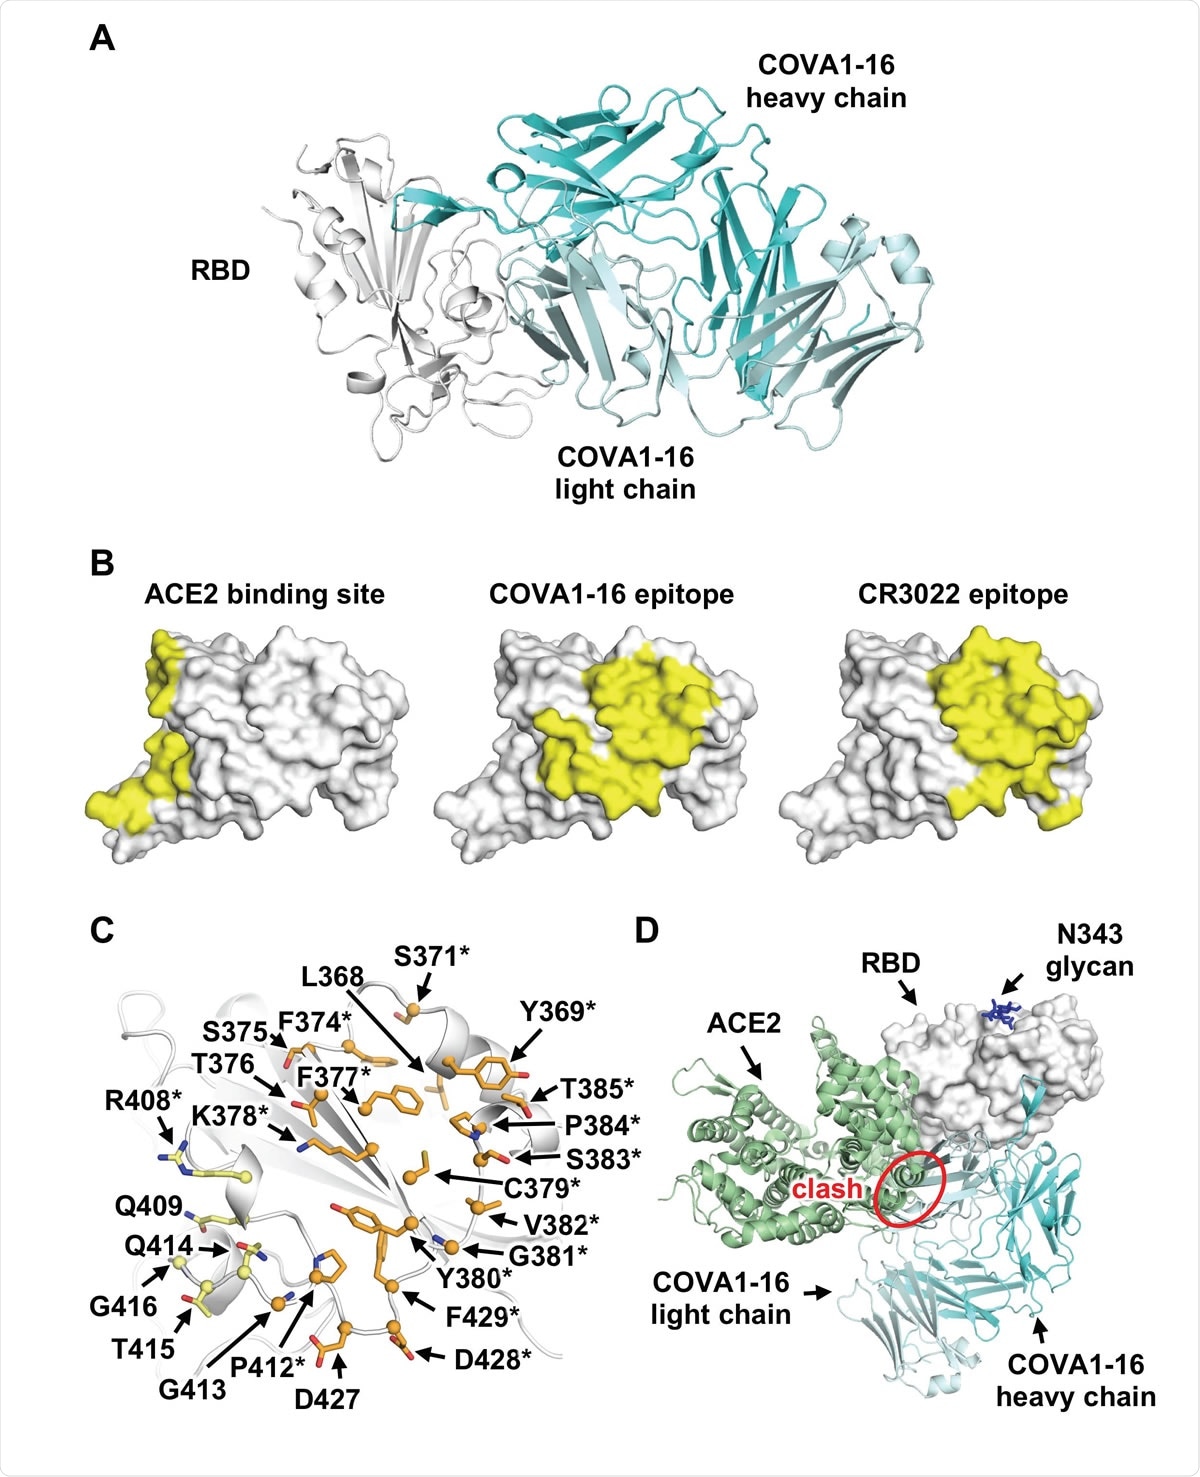 Comparison of COVA1-16 binding mode with CR3022 and ACE2. (A) Crystal structure of COVA1-16/RBD complex with RBD in grey and COVA1-16 Fab in cyan (heavy chain) and greyish blue (light chain). (B) ACE2-binding site (PDB 6M0J, left) [10], COVA1- 16 epitope (this study, middle), and CR3022 epitope (PDB 6W41, right) [13] are highlighted in yellow. (C) RBD residues in the COVA1-16 epitope are shown. Epitope residues contacting the heavy chain are in orange and light chain in yellow. Representative epitope residues are labeled. Residues that are also part of CR3022 epitope are indicated with asterisks. (D) The ACE2/RBD complex structure is aligned in the same orientation as the COVA1-16/RBD complex. COVA1-16 (cyan) would clash with ACE2 (green) if they were to approach their respective RBD binding sites at the same time (indicated by red circle).